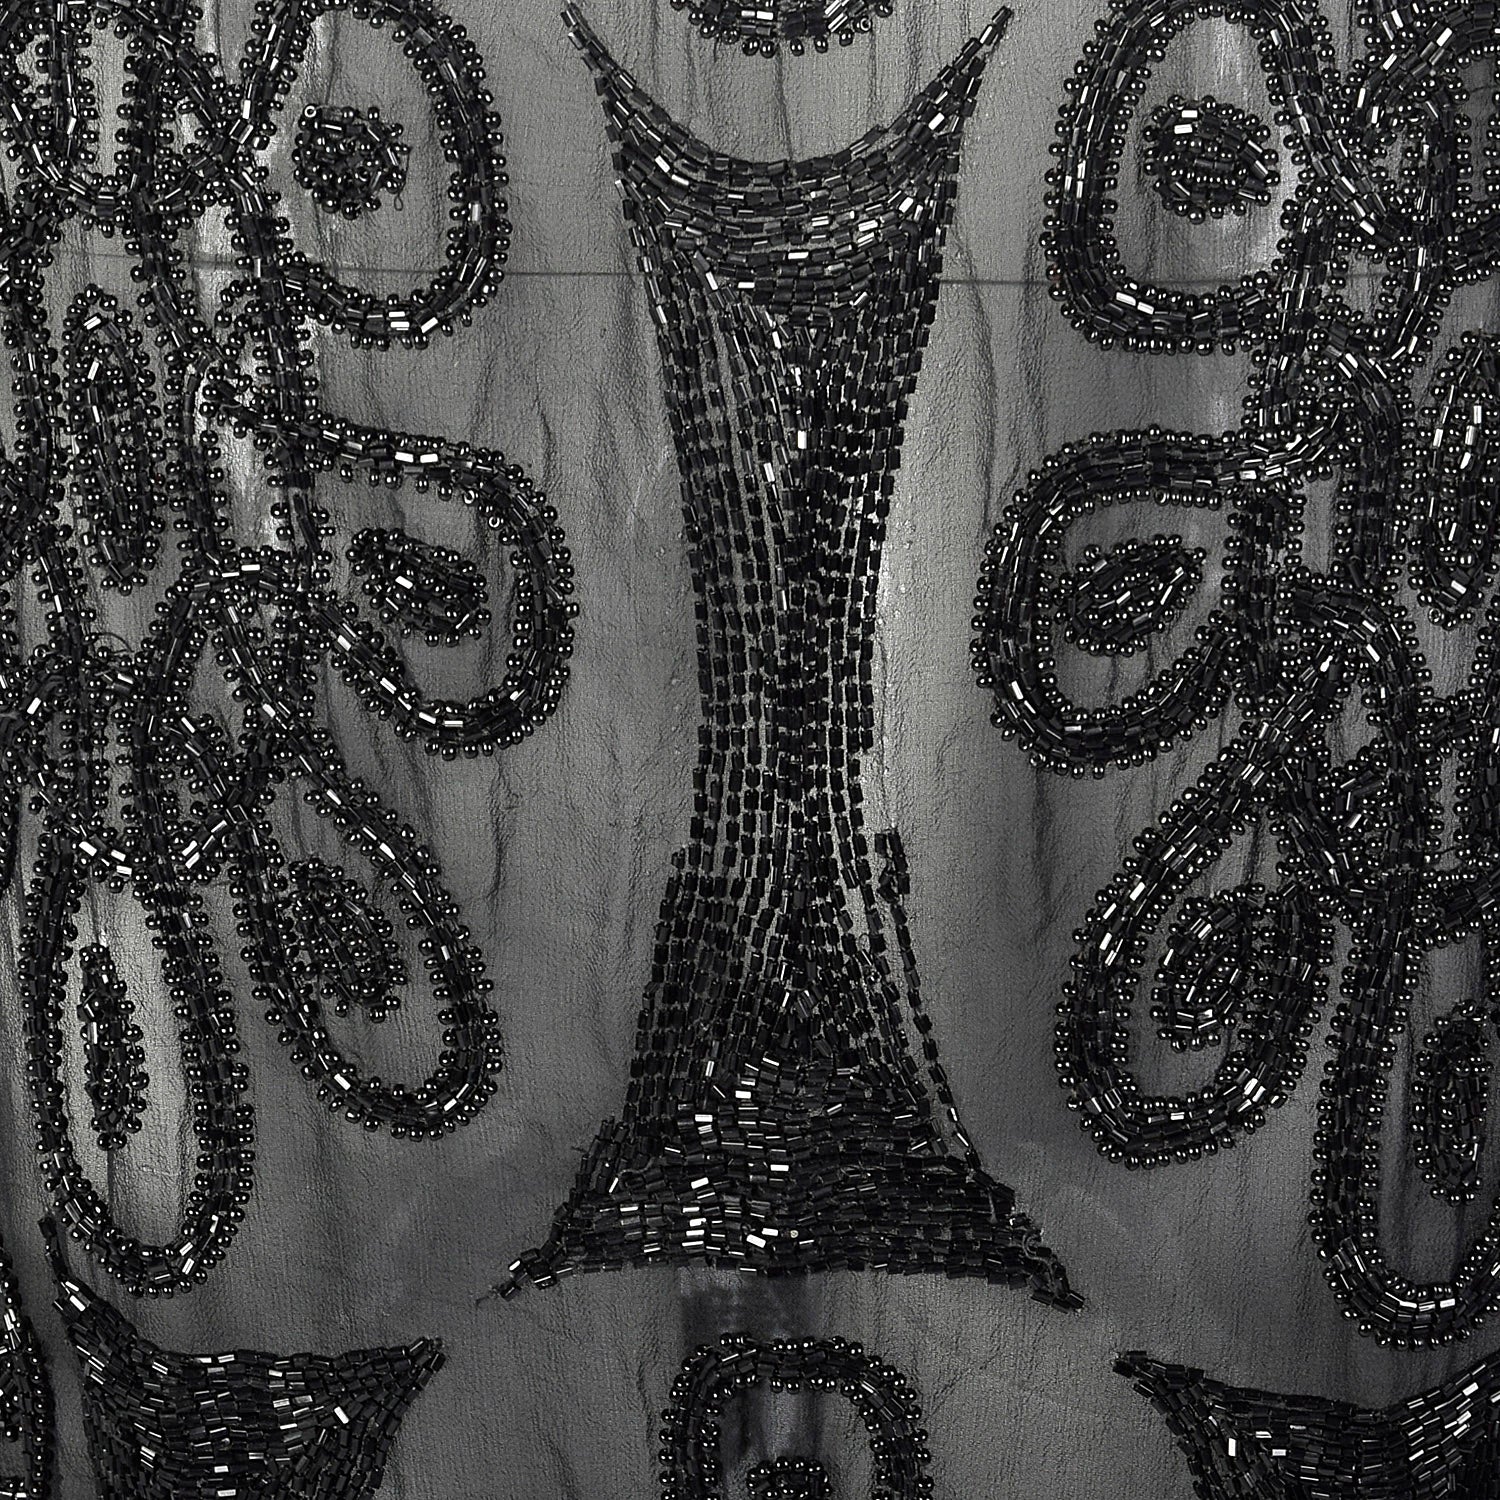 1920s Beaded Black Silk Dress with Celtic Style Knots